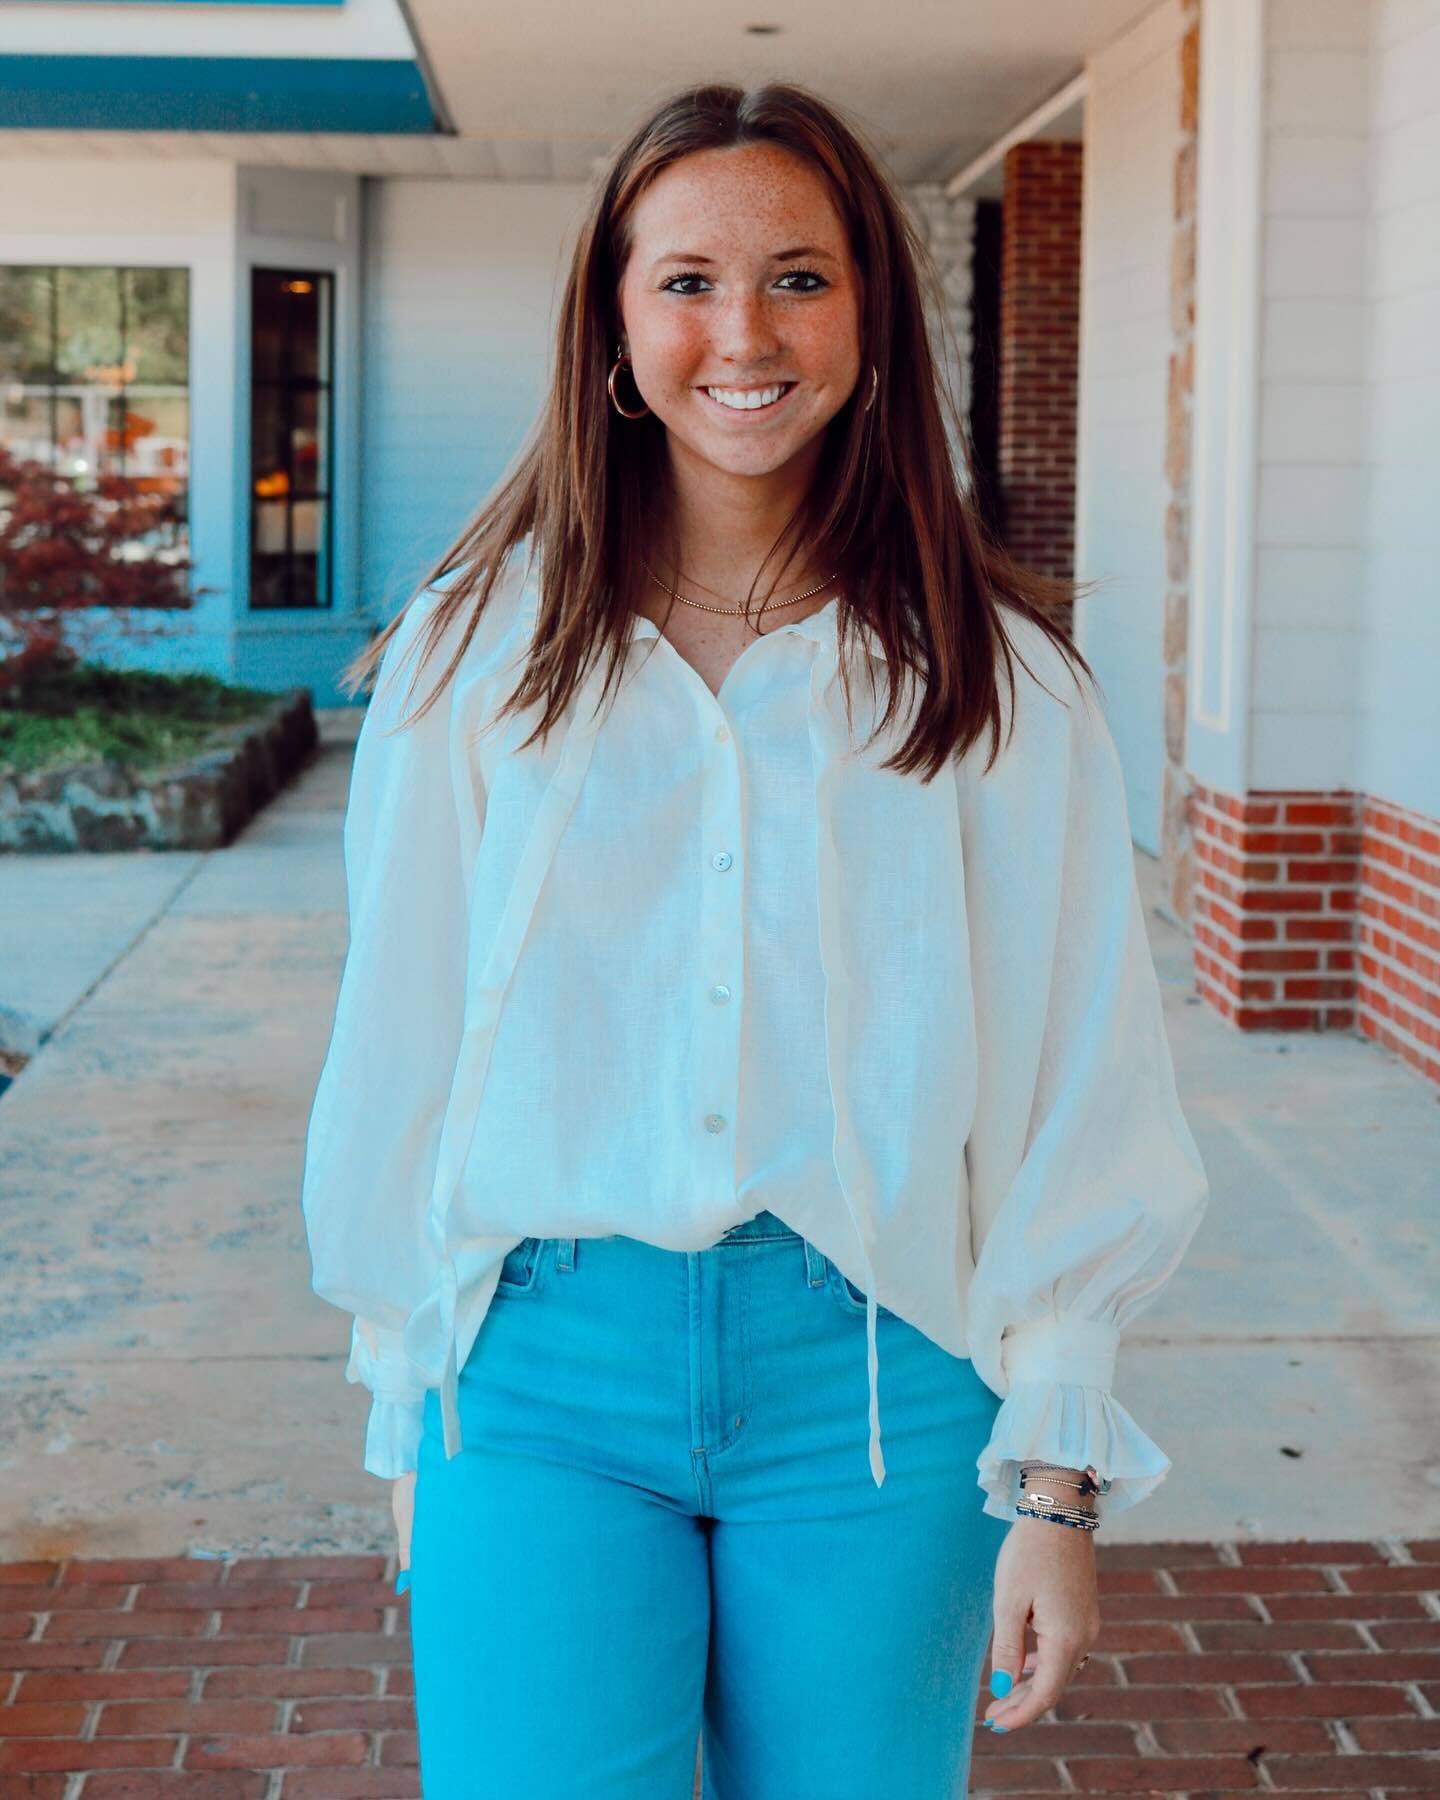 Meet Marah &mdash; our summer intern! ✨

Marah is an undergraduate student at Liberty University pursuing a degree in Digital Marketing and Advertising. She has a passion for social media marketing and loves learning new ways to connect with people. 